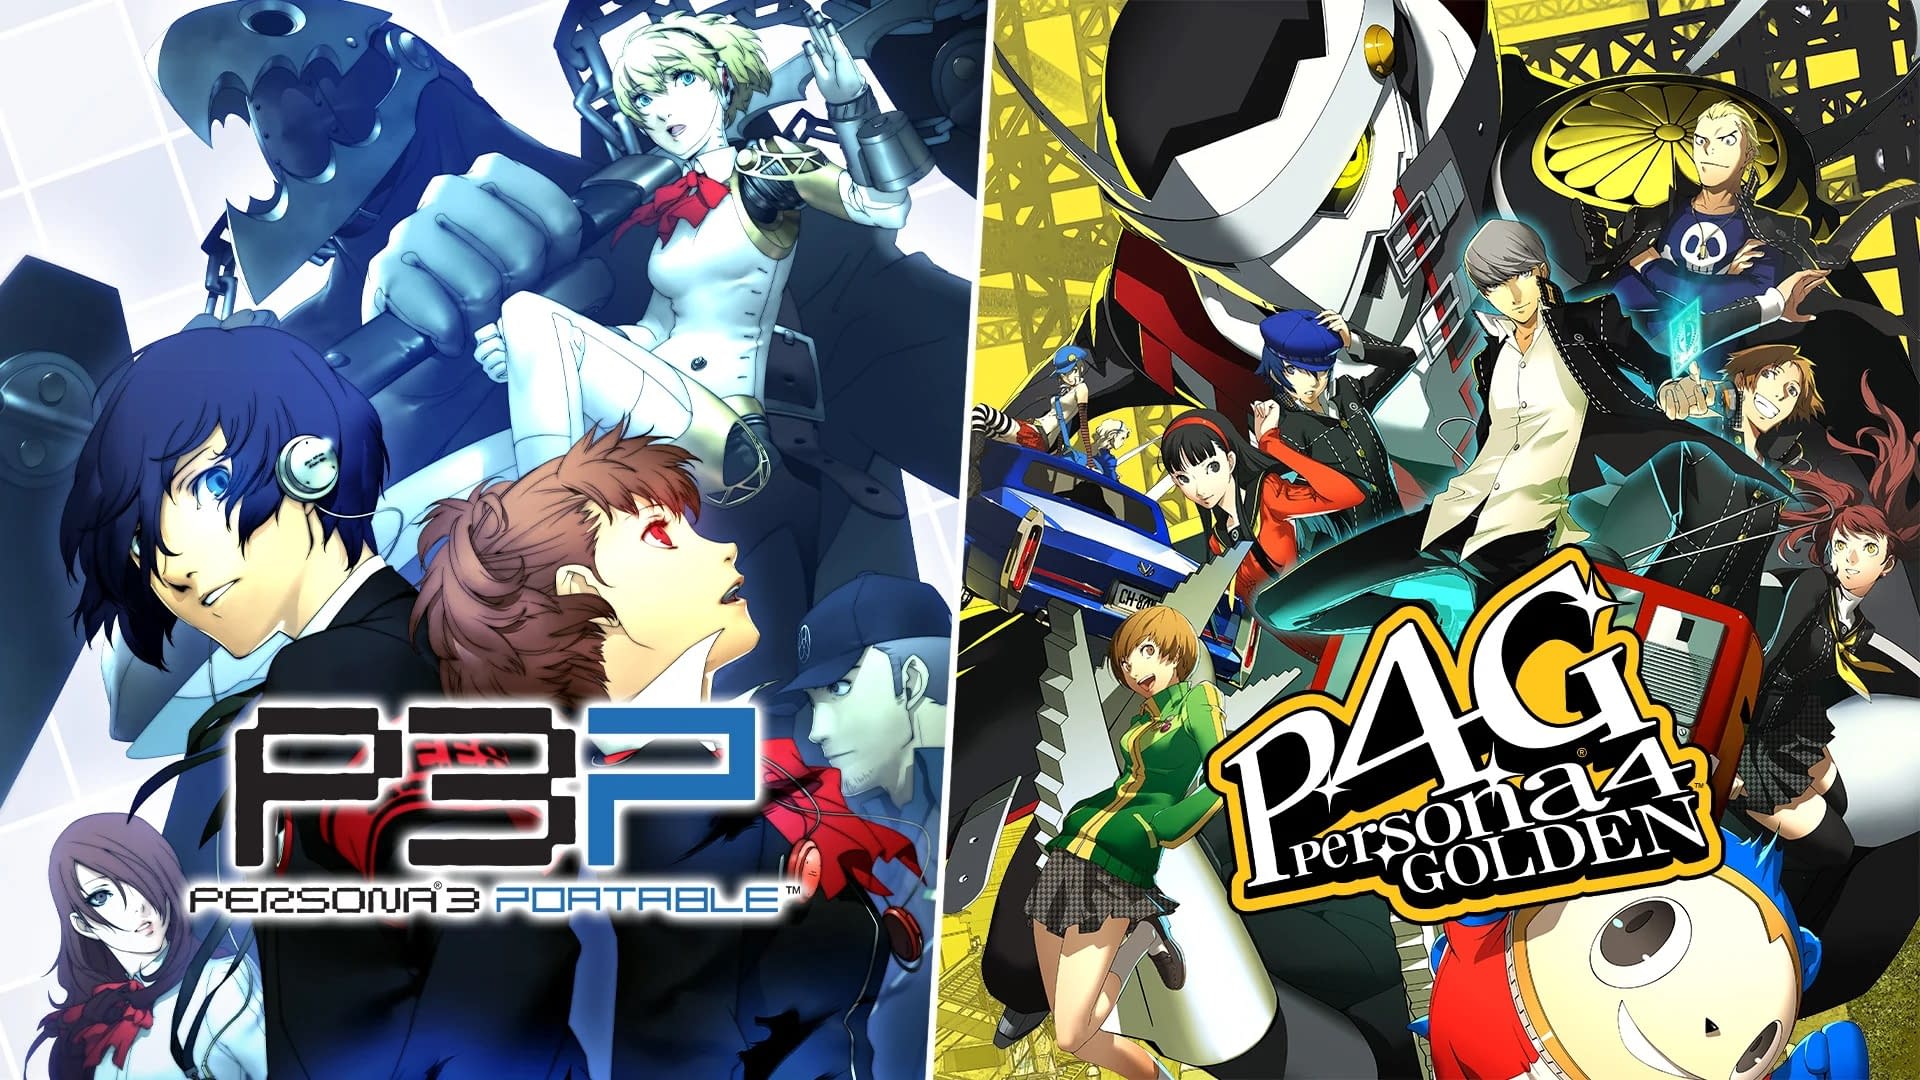 Persona 3 Portable Persona 4 Golden Gets New Gameplay Trailer